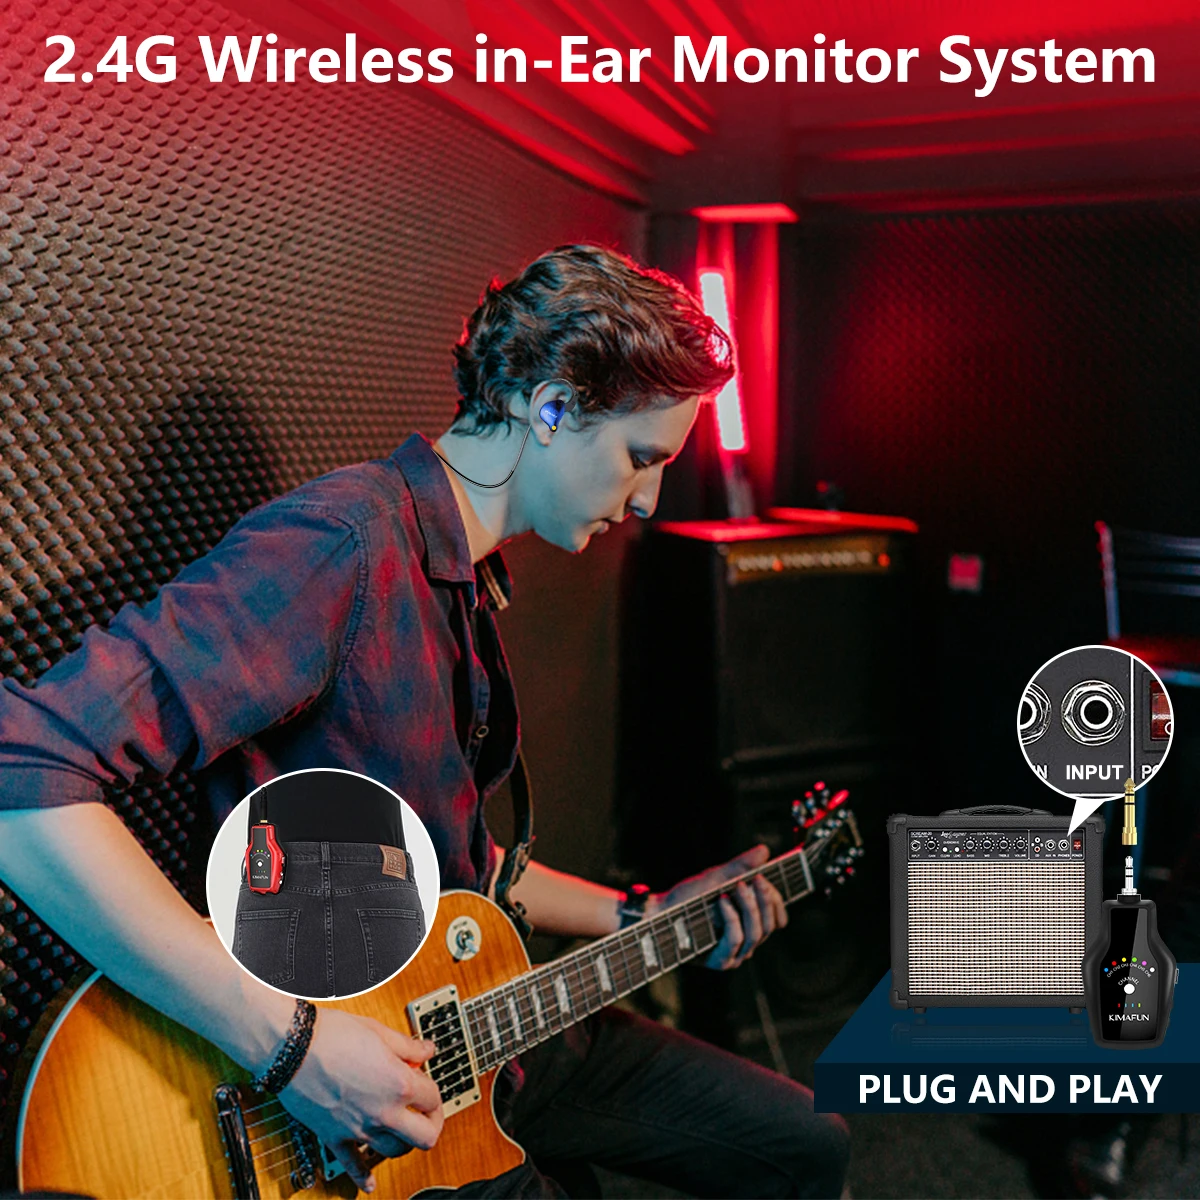 2.4GHz In Ear Monitor Wireless System 6 Channels Transmitter And Receiver Personal IEM For Live Show,Band Rehearsal,DJ Equipment enlarge